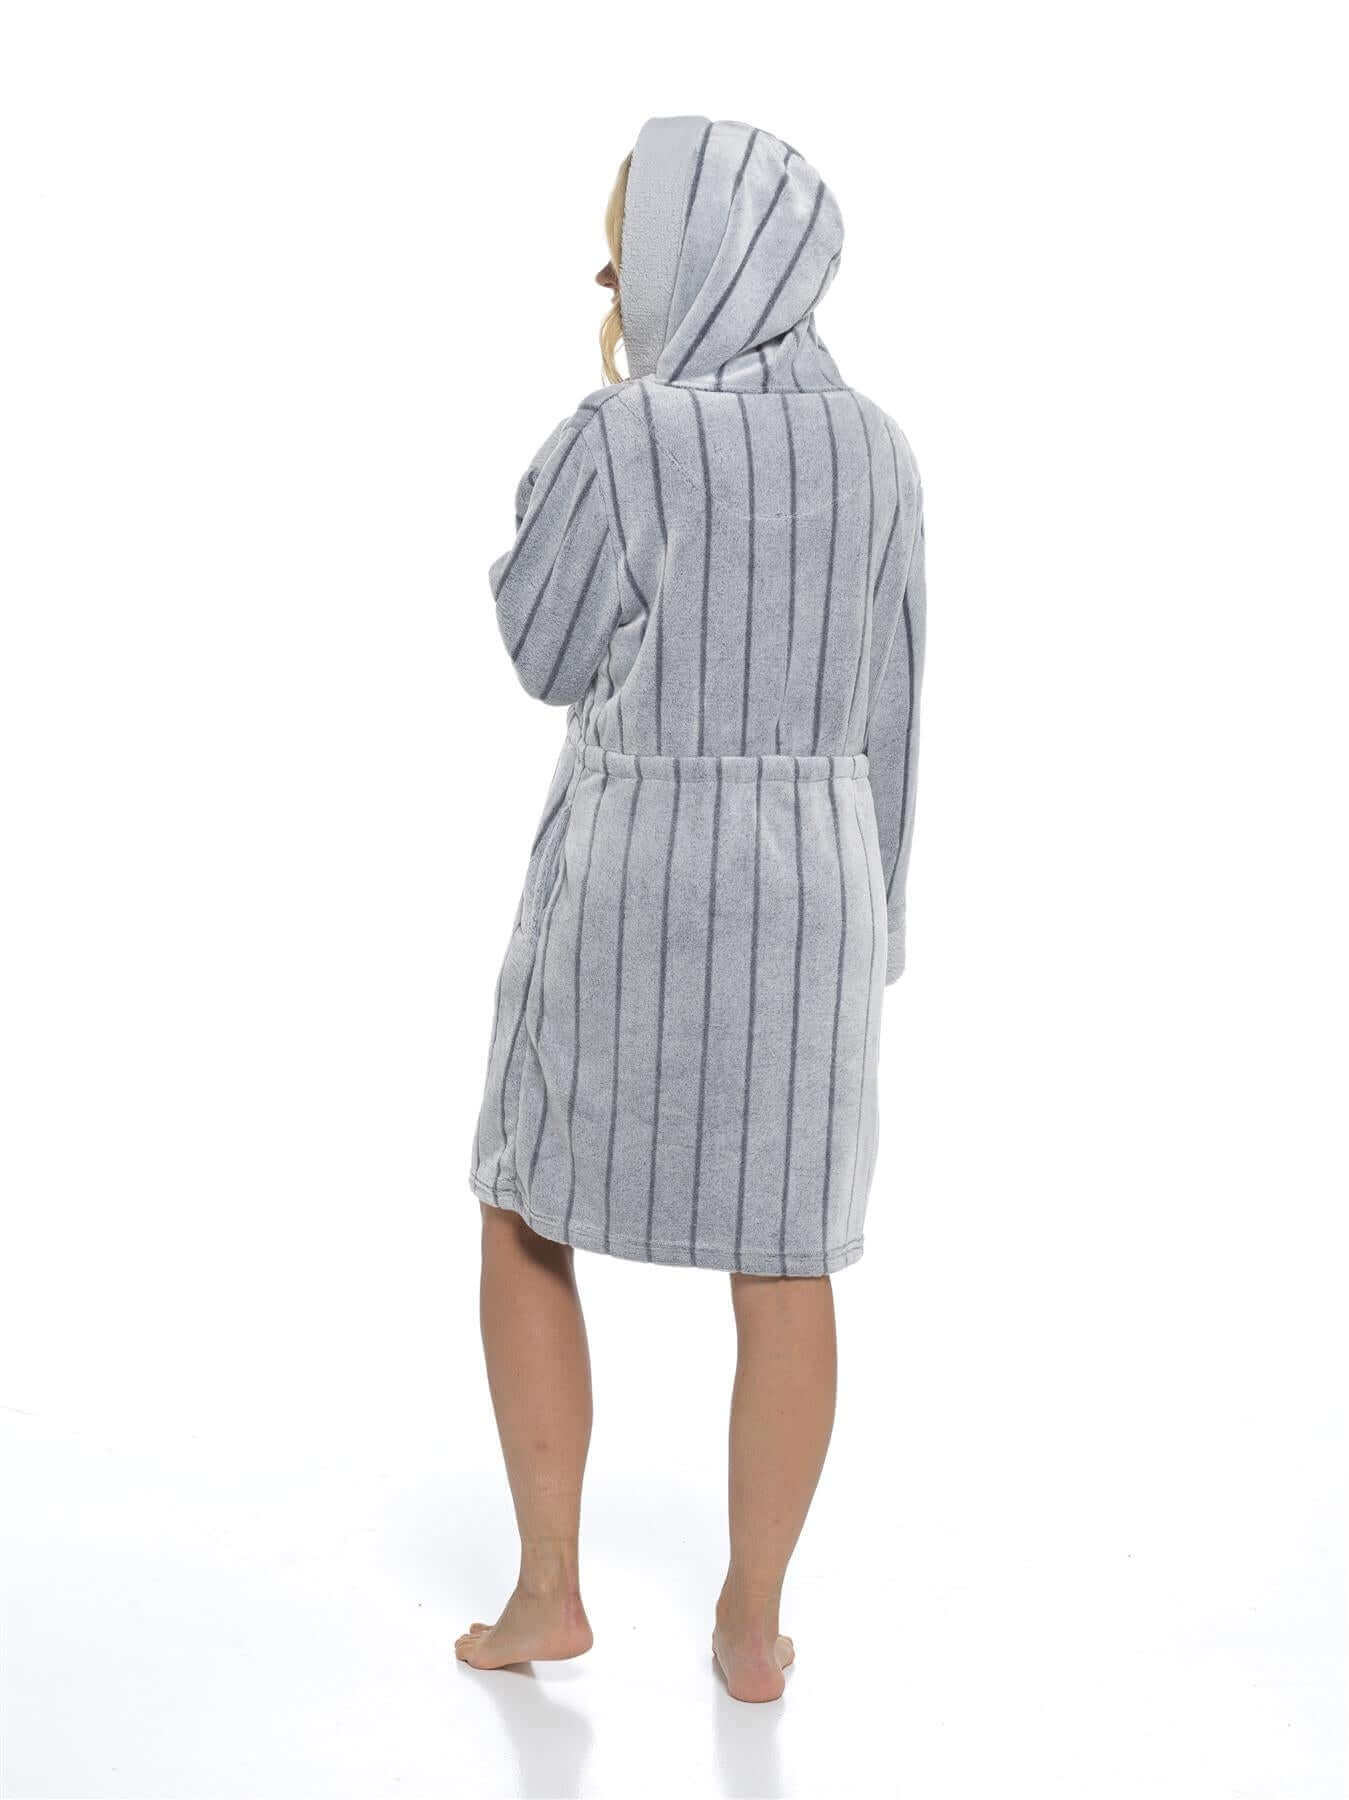 Women's Shadow Stripe Shawl Collar Robe, Bath Robes Super Soft Dressing Gown. Buy now for £20.00. A Robe by Sock Stack. bath robe, clothing, comfortable, dressing, dressing gown, fleece, fluffy, girls, grey, grey stripes, hooded, hooded robe, ladies, larg